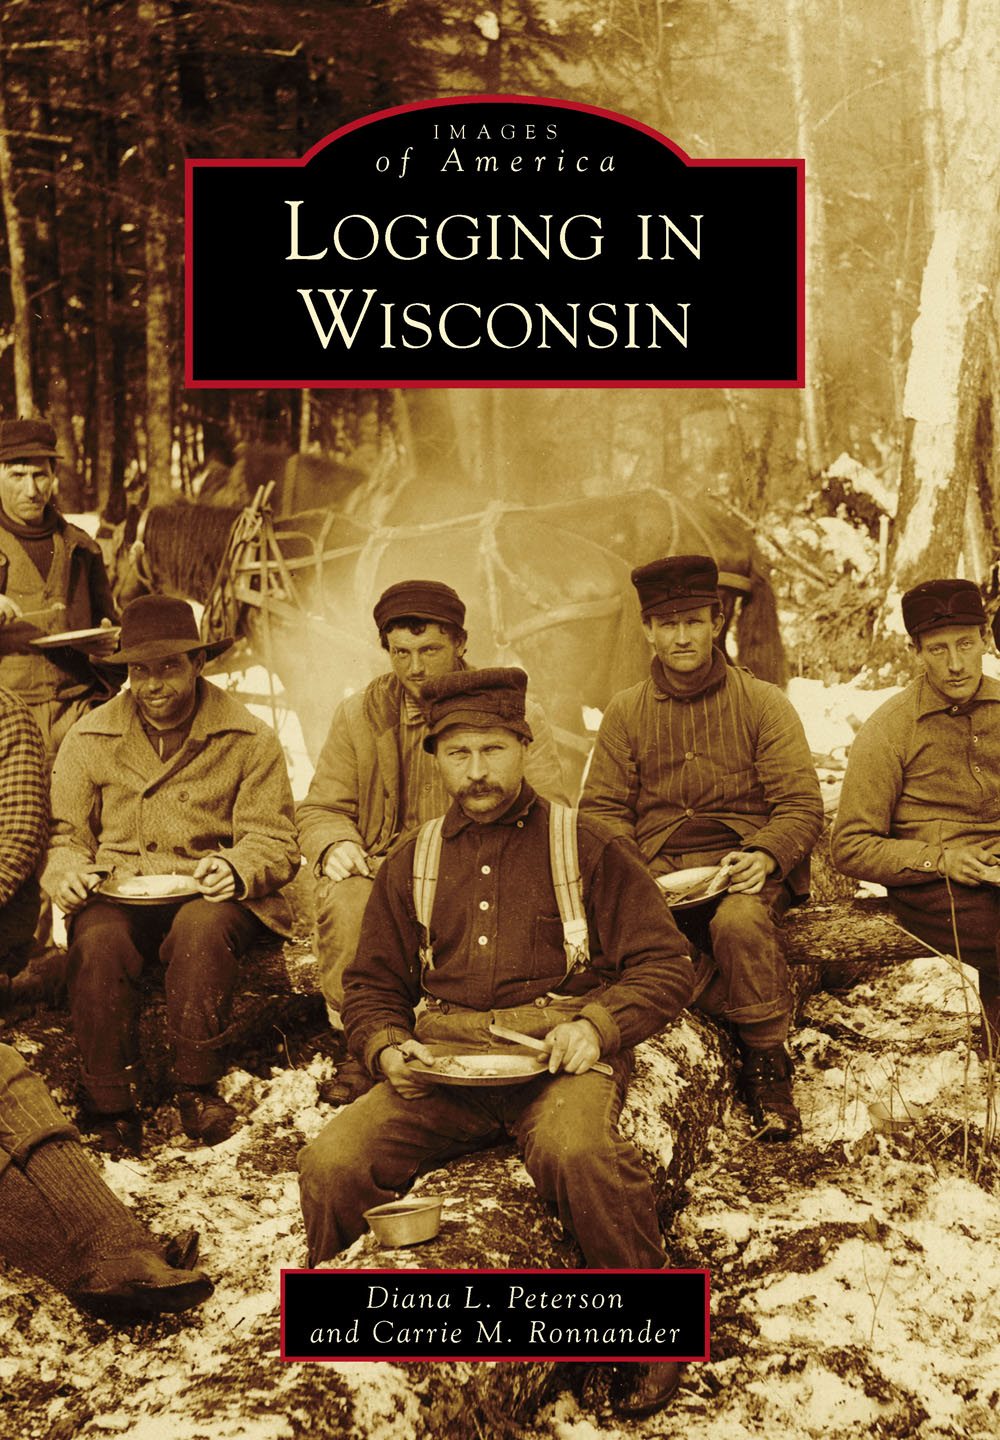 IMAGES of America LOGGING IN WISCONSIN ON THE COVER A crew eats together in - photo 1